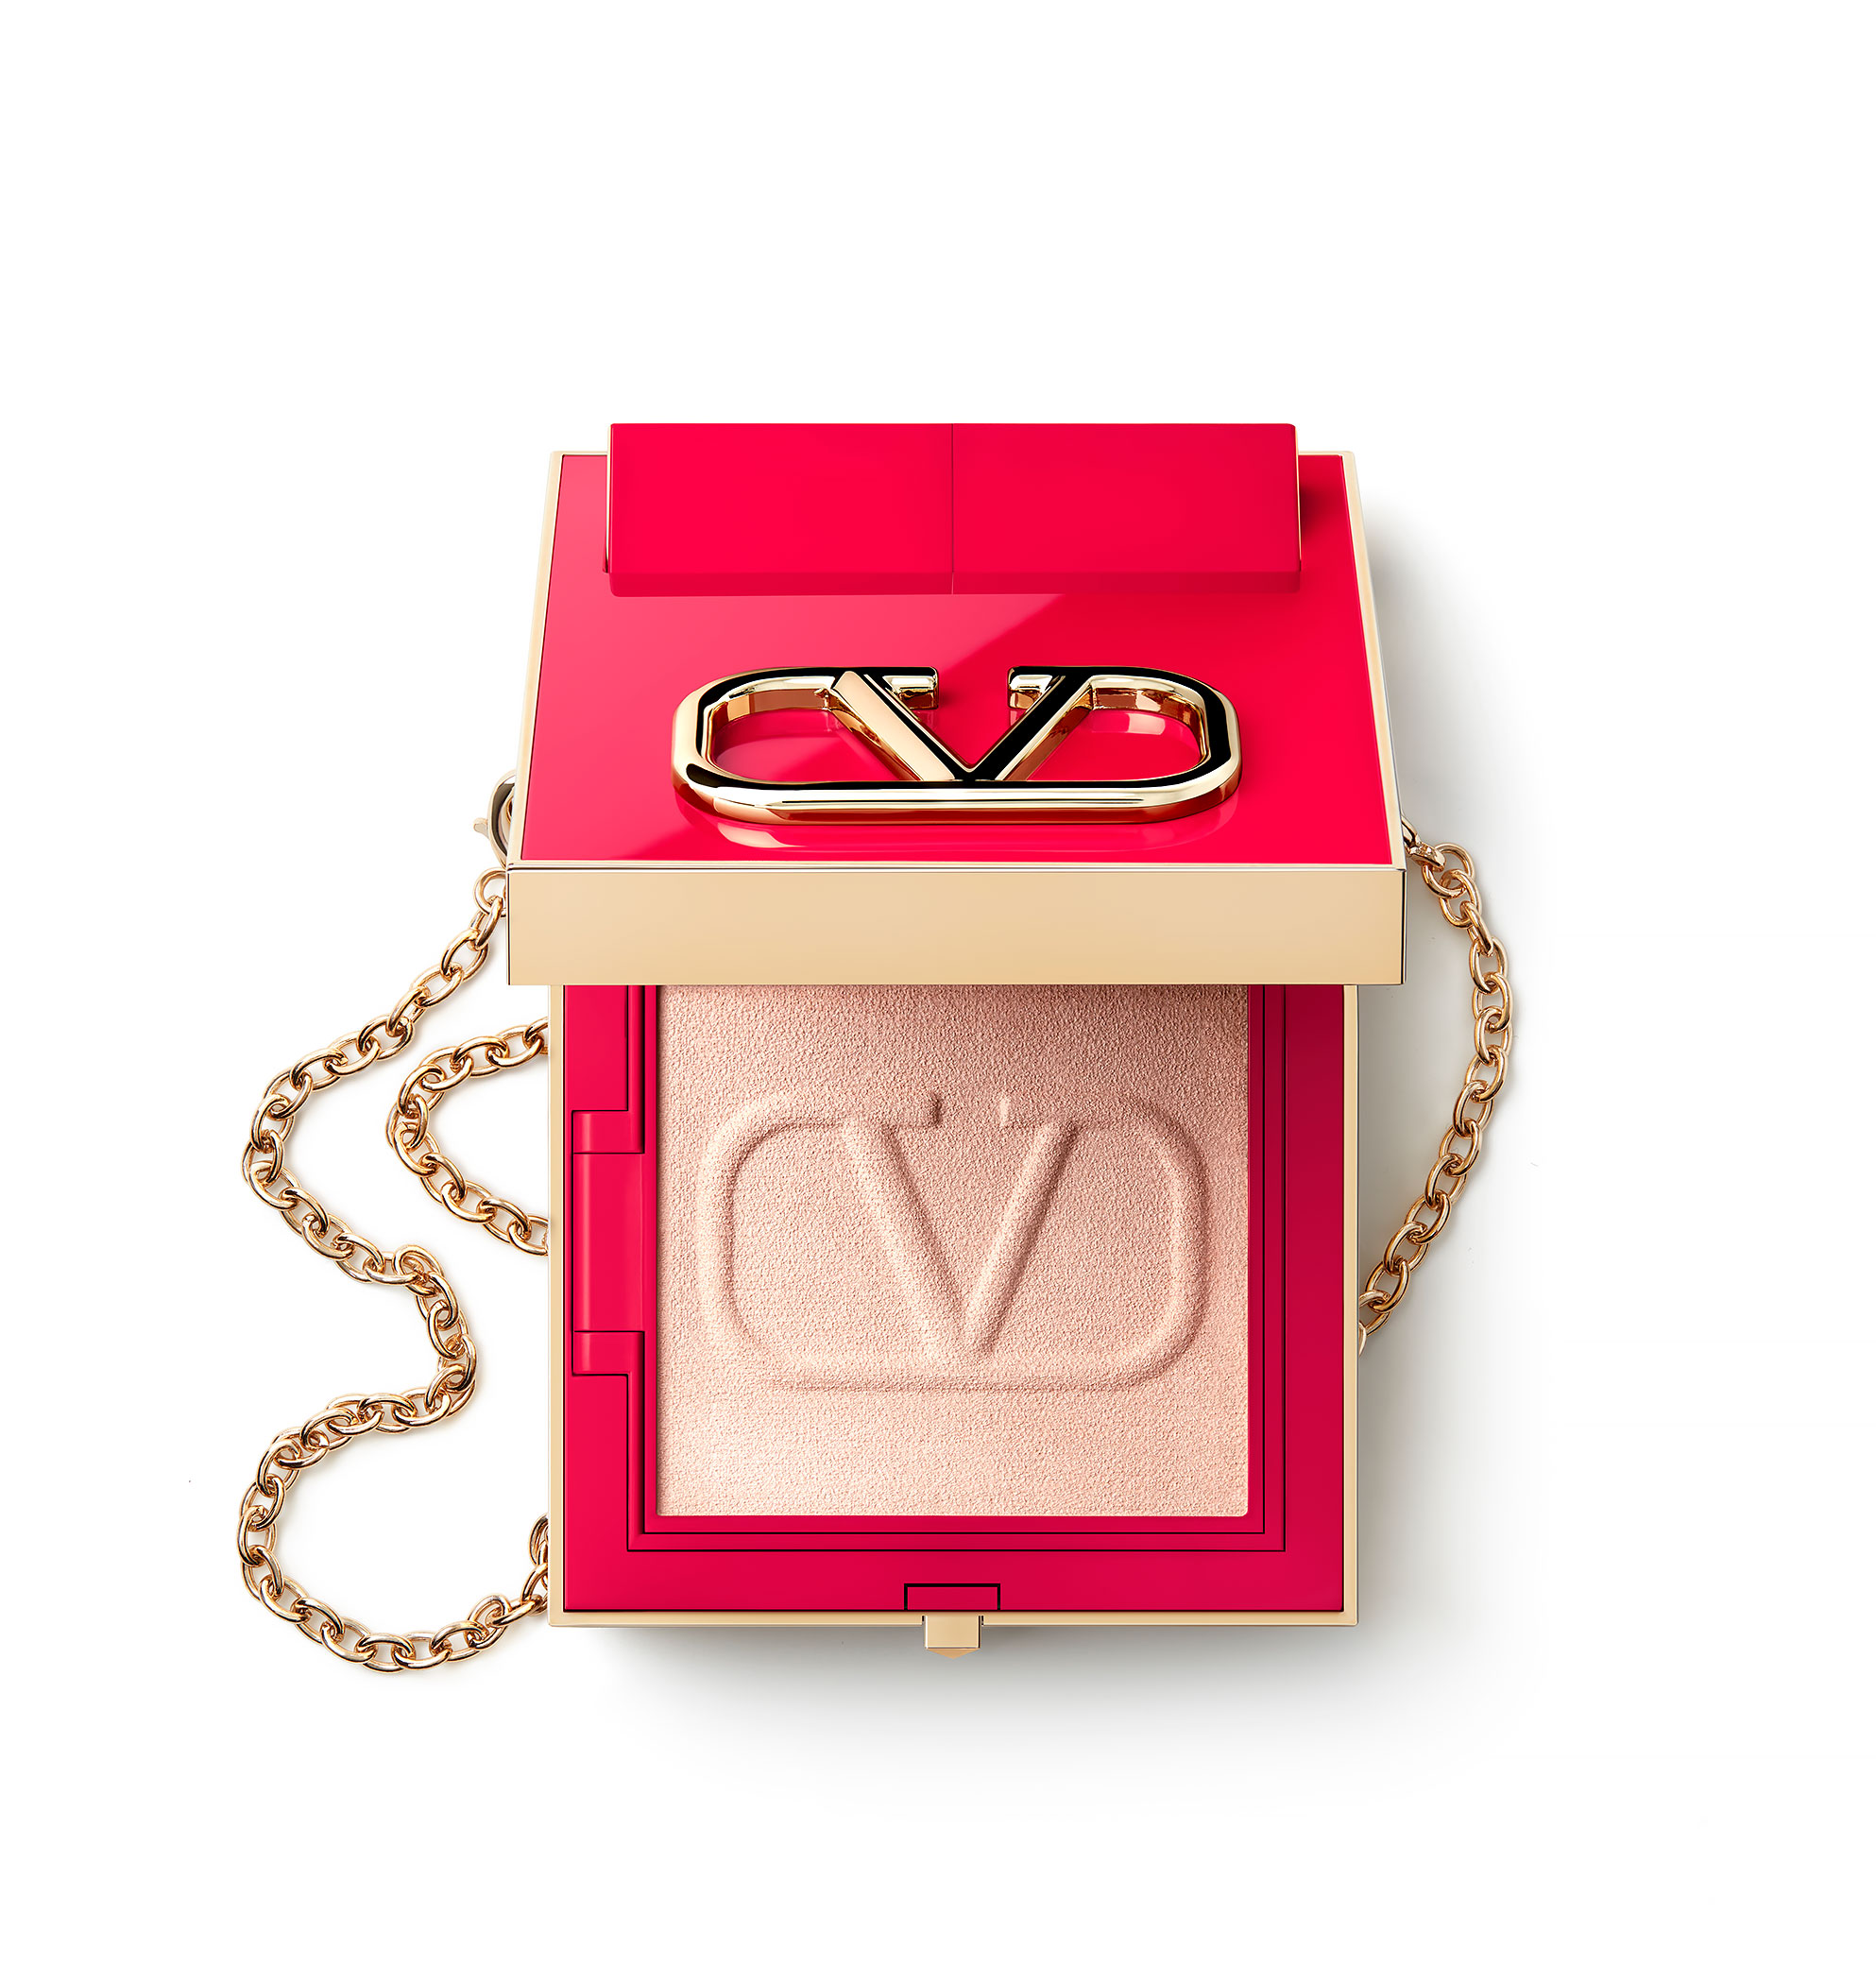 Valentino Makeup: Products, Price, Details